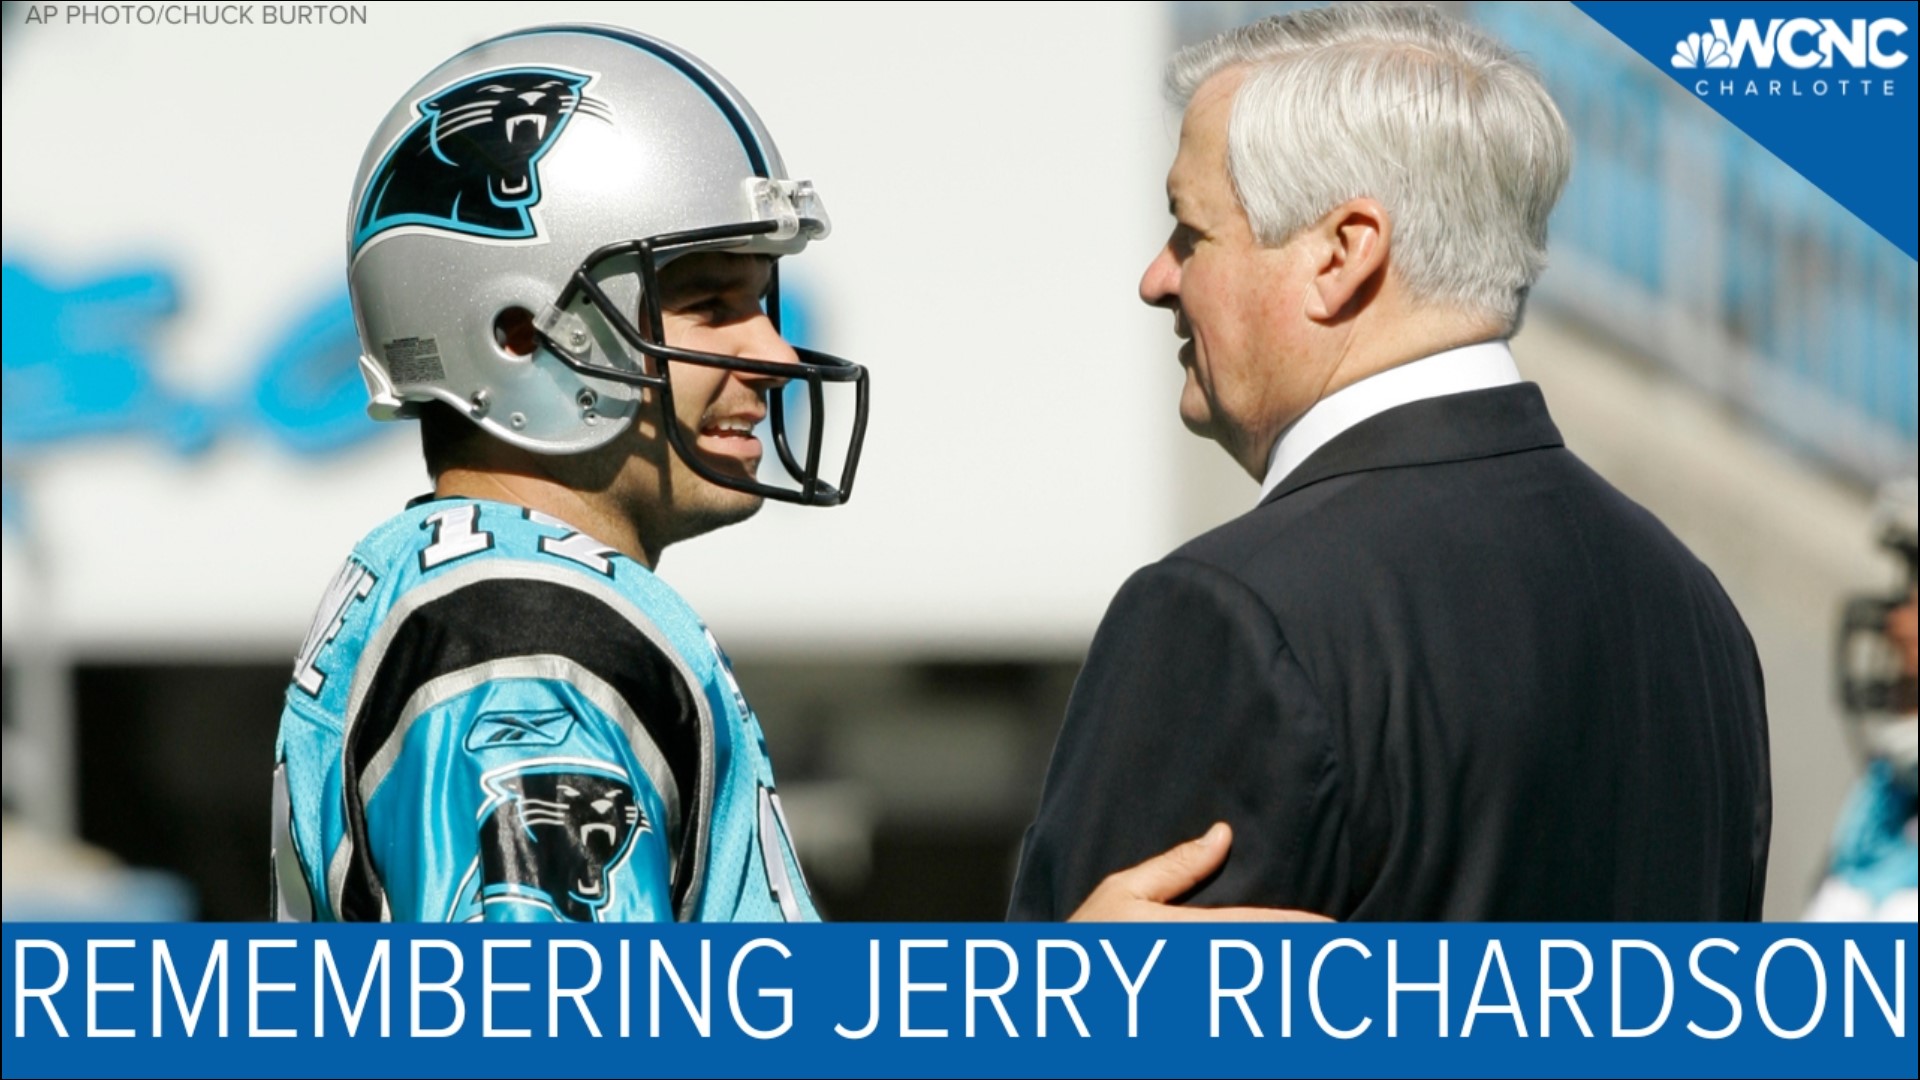 WCNC Charlotte Sports Director Nick Carboni spoke with former Panthers QB Jake Delhomme about Jerry Richardson's life and legacy.